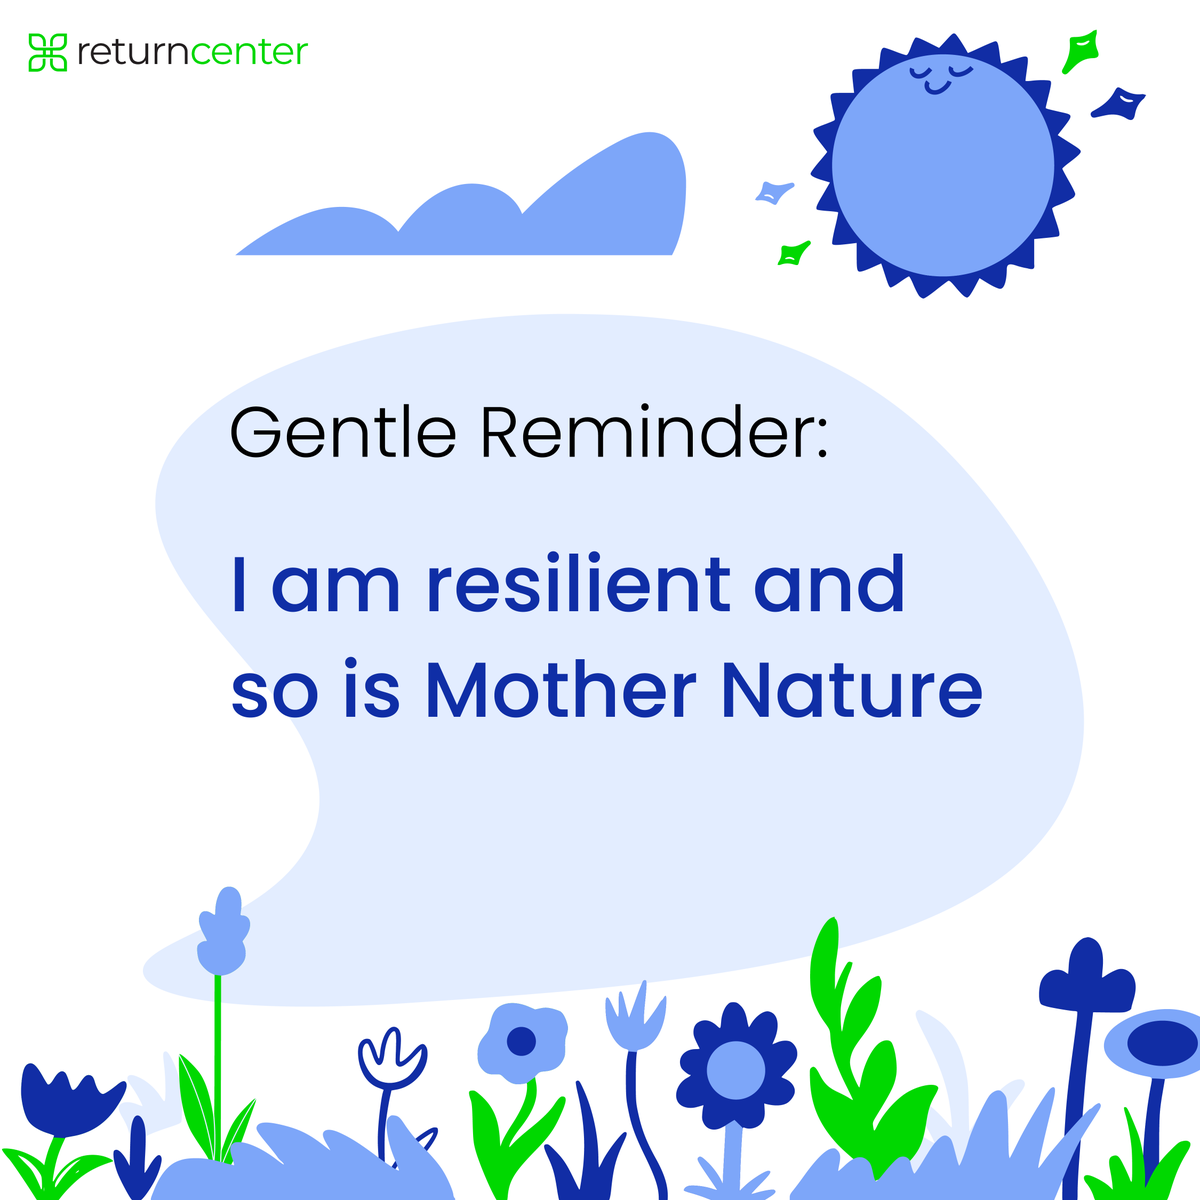 Just keep growing 🌷🌷🌷

#EcoAffirmations #PowerfulThoughts #Resilience #MotherNature #YouveGotThis #BreatheDeep #Sustainability #ProtectThePlanet #Recycle #ReturnCenter